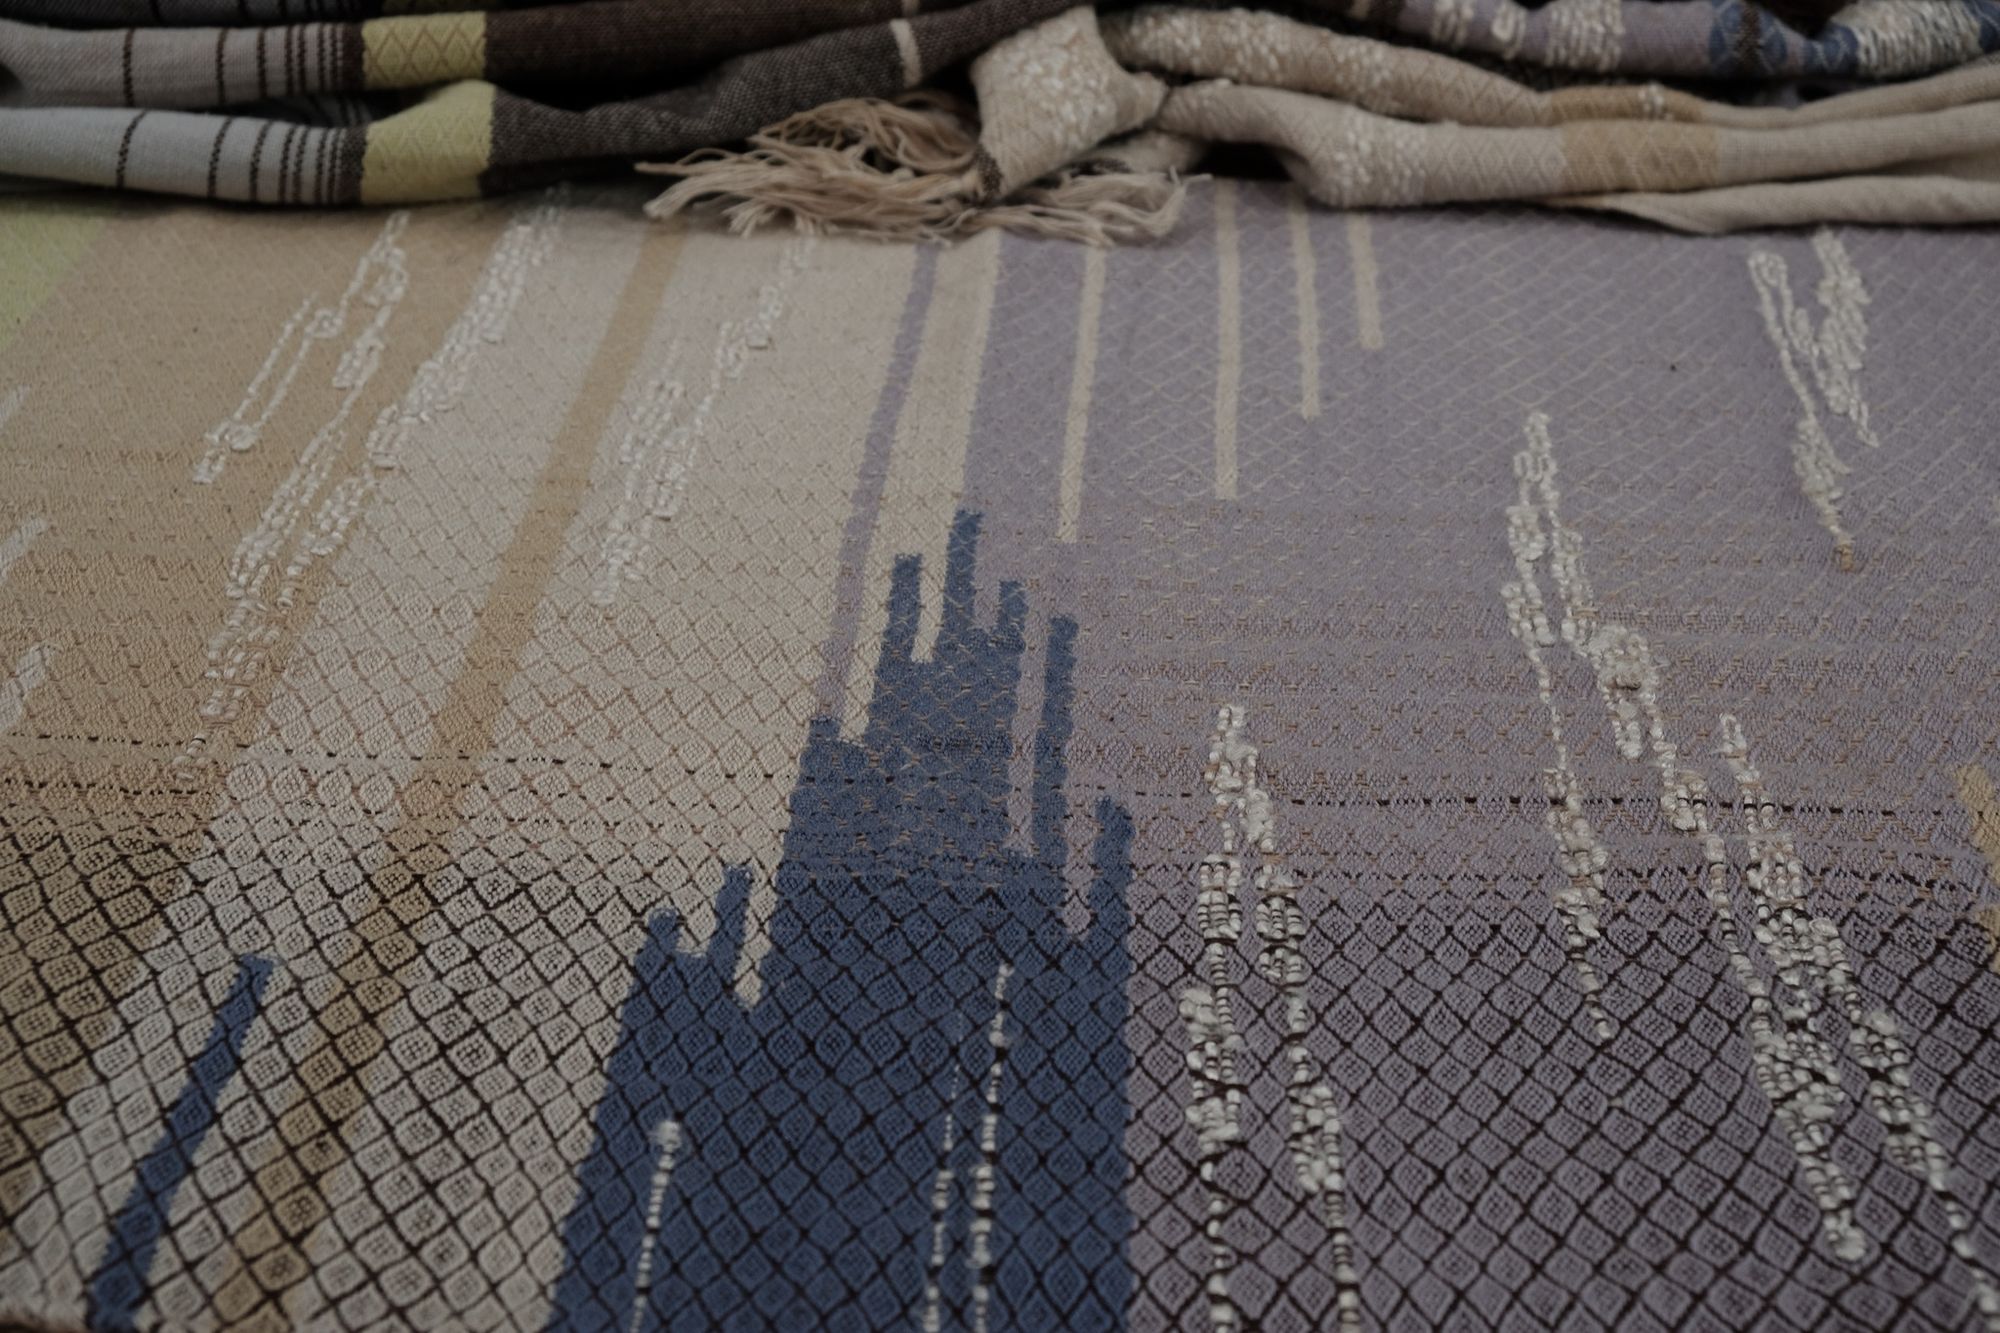 A long piece of handwoven fabric with diamond pattern in lilac purple, dark brown and earth tones is resting on a wooden floor